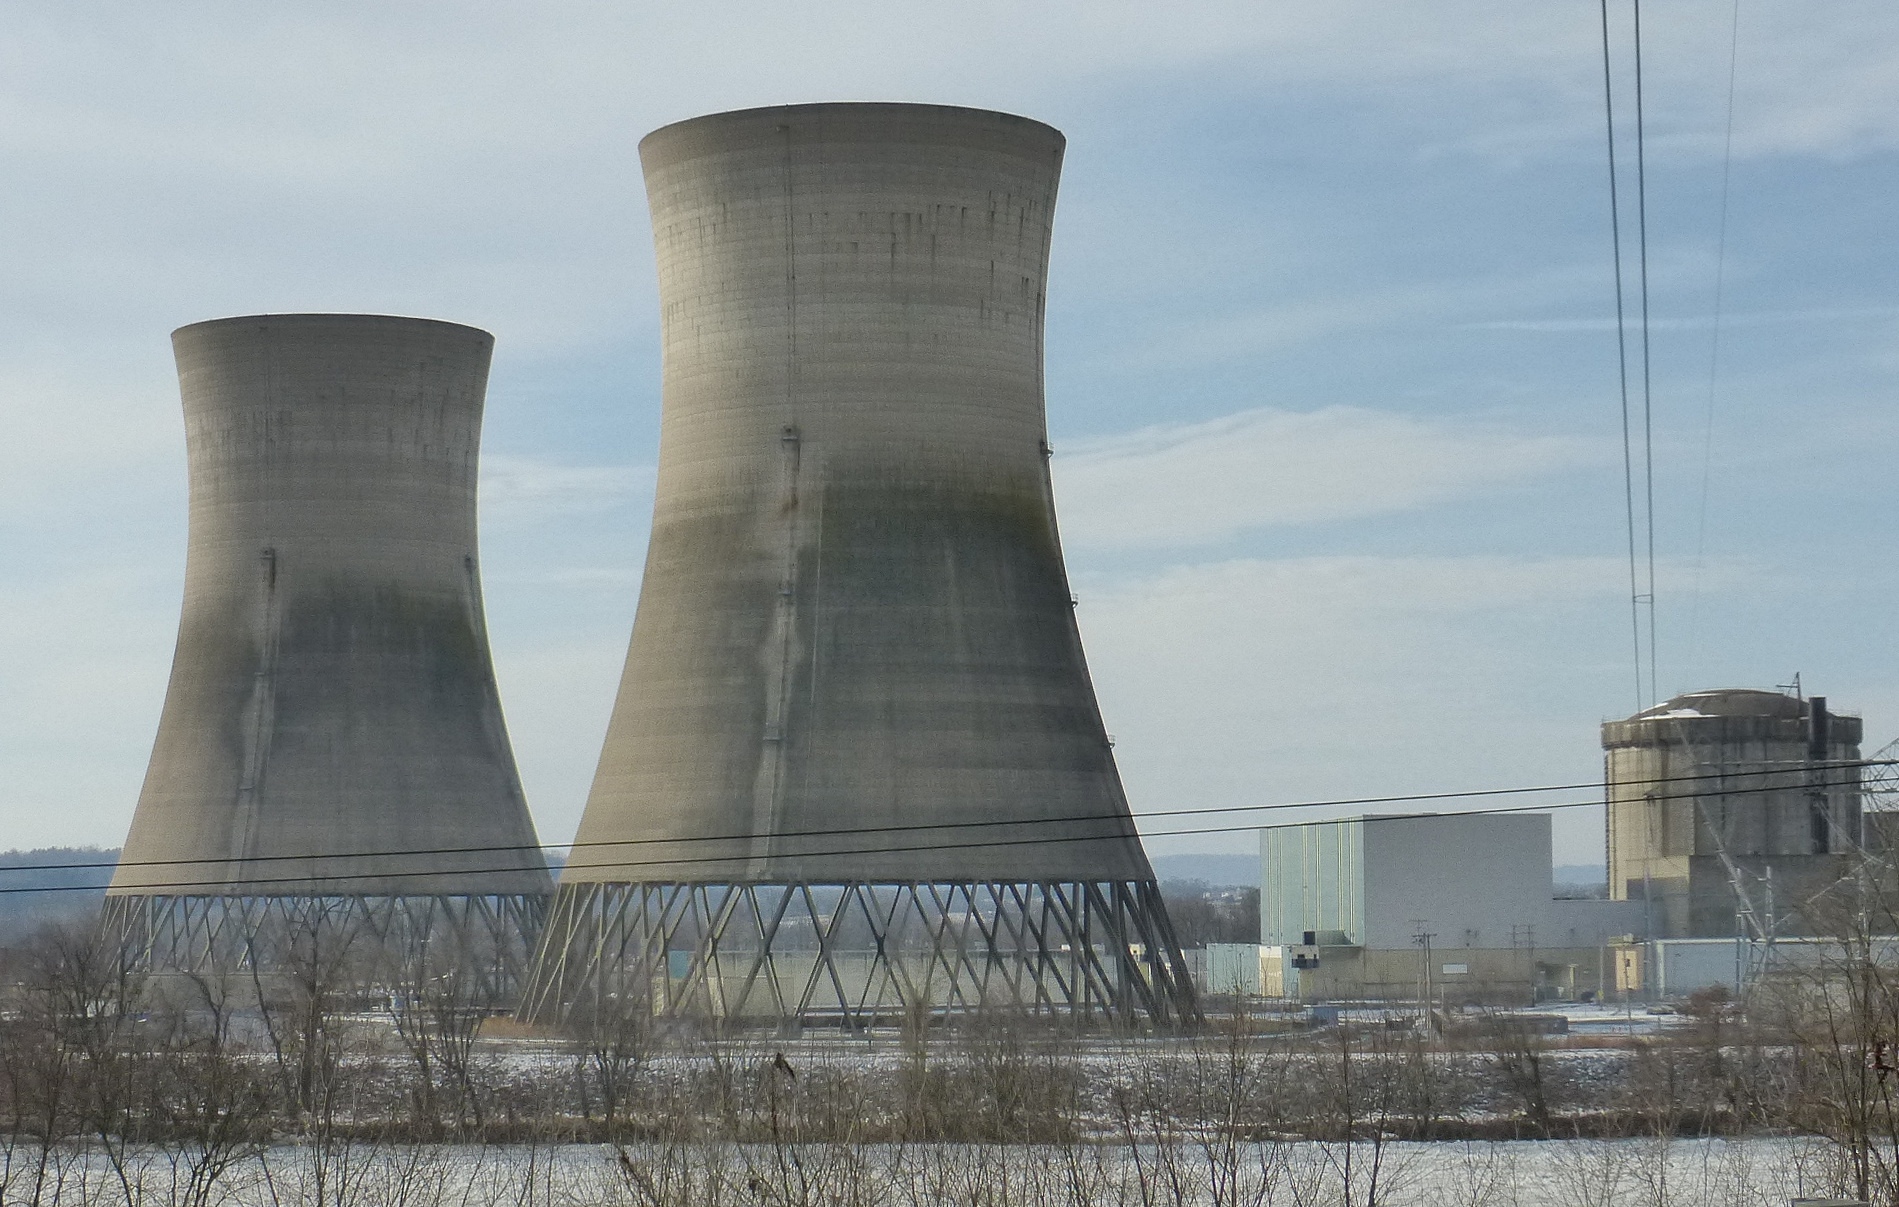 Image: Experts warn that shutting down nuclear plants would “negate” efforts to transition to clean energy